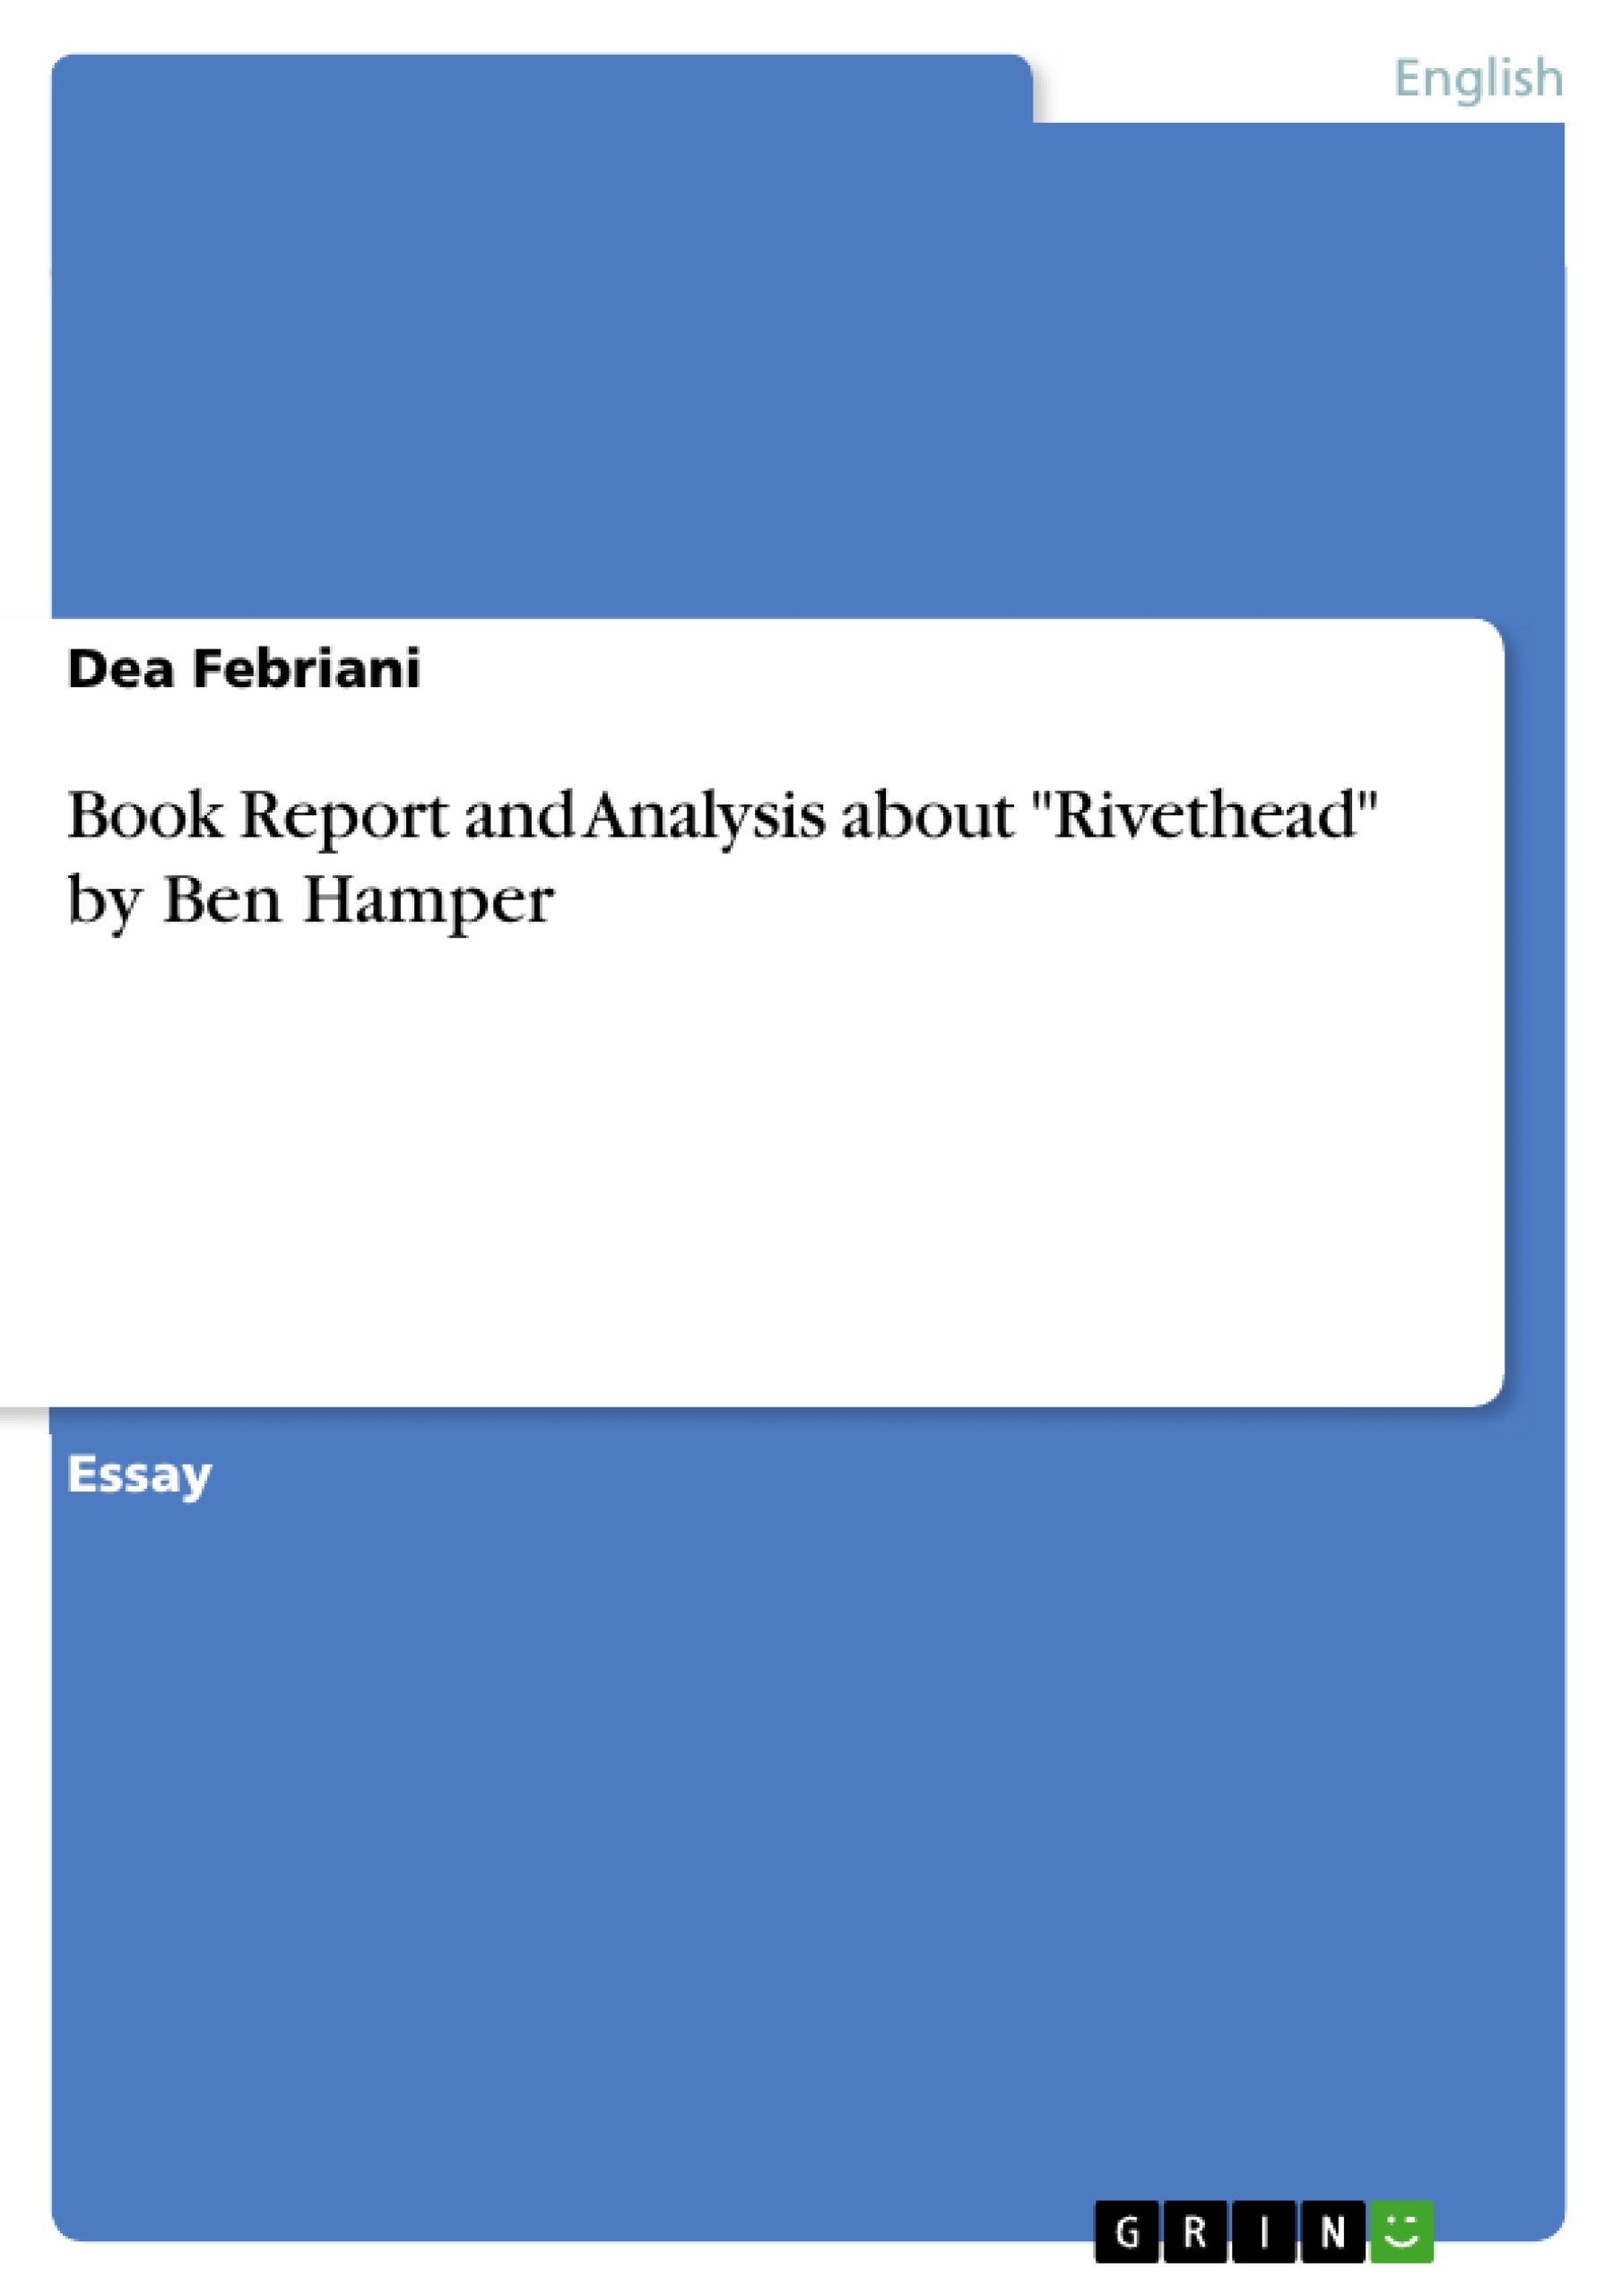 Título: Book Report and Analysis about "Rivethead" by Ben Hamper